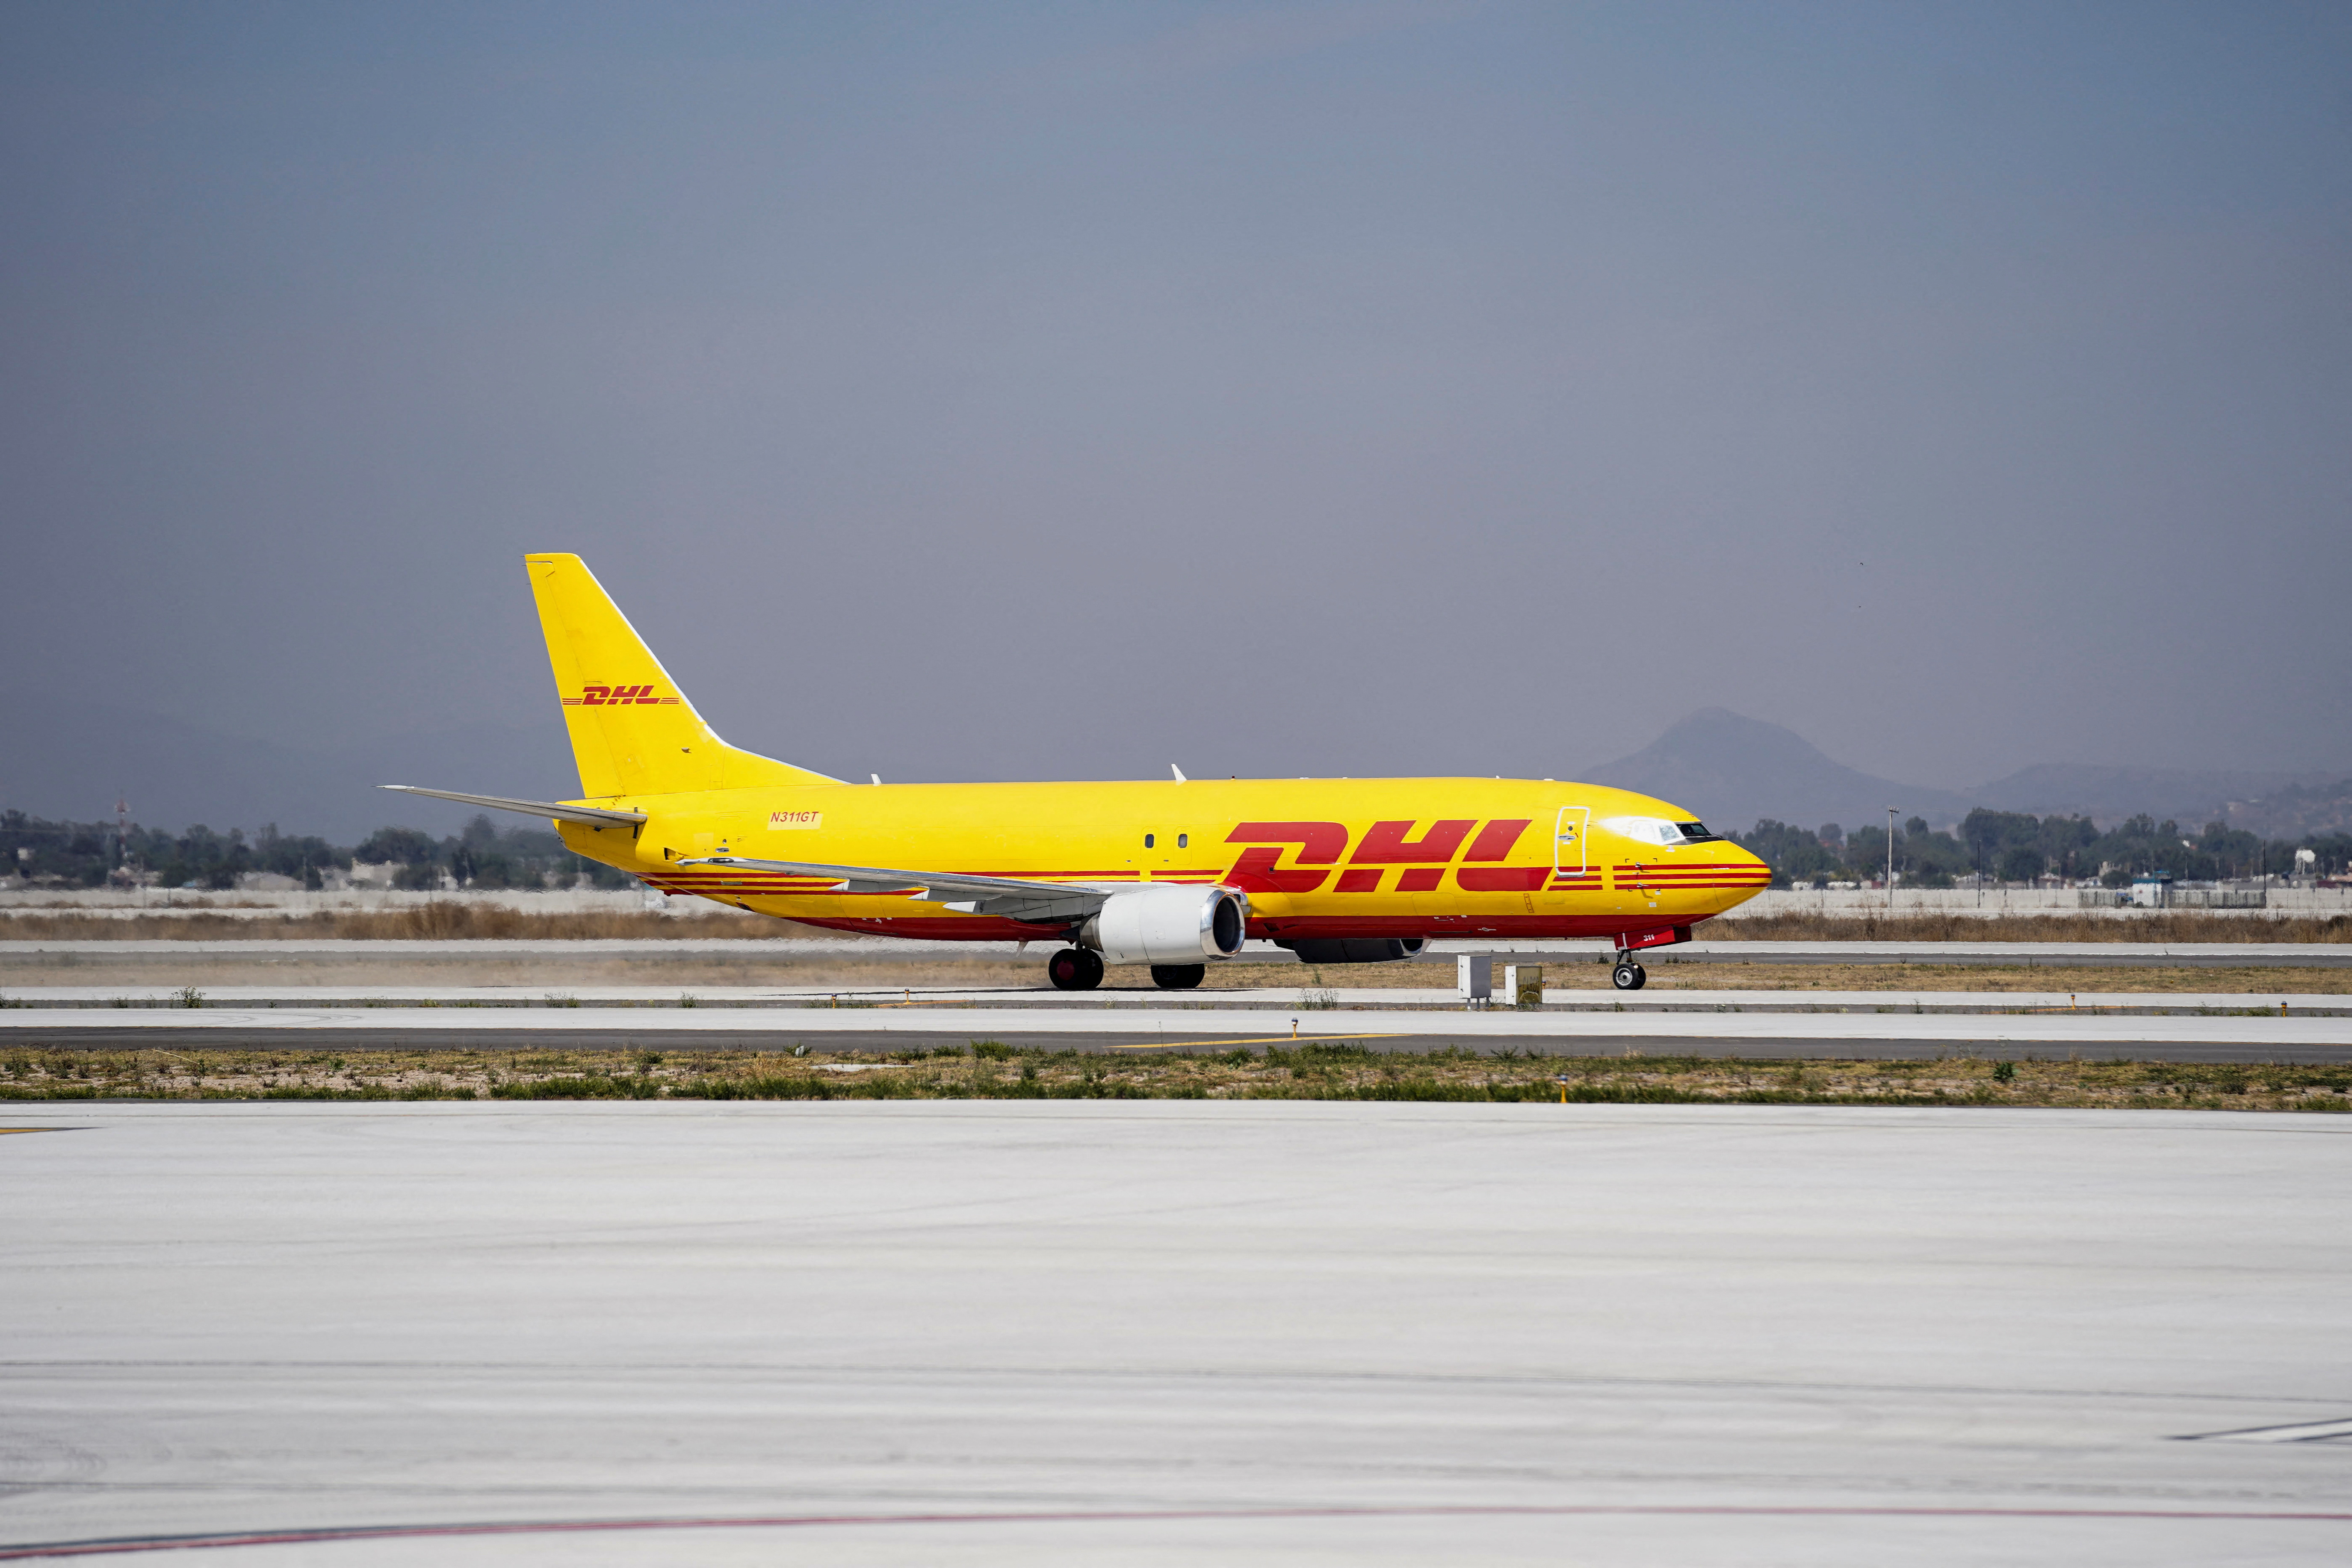 DHL inaugurates first cargo plane route and cargo facilities at the Felipe Angeles international airport in Zumpango